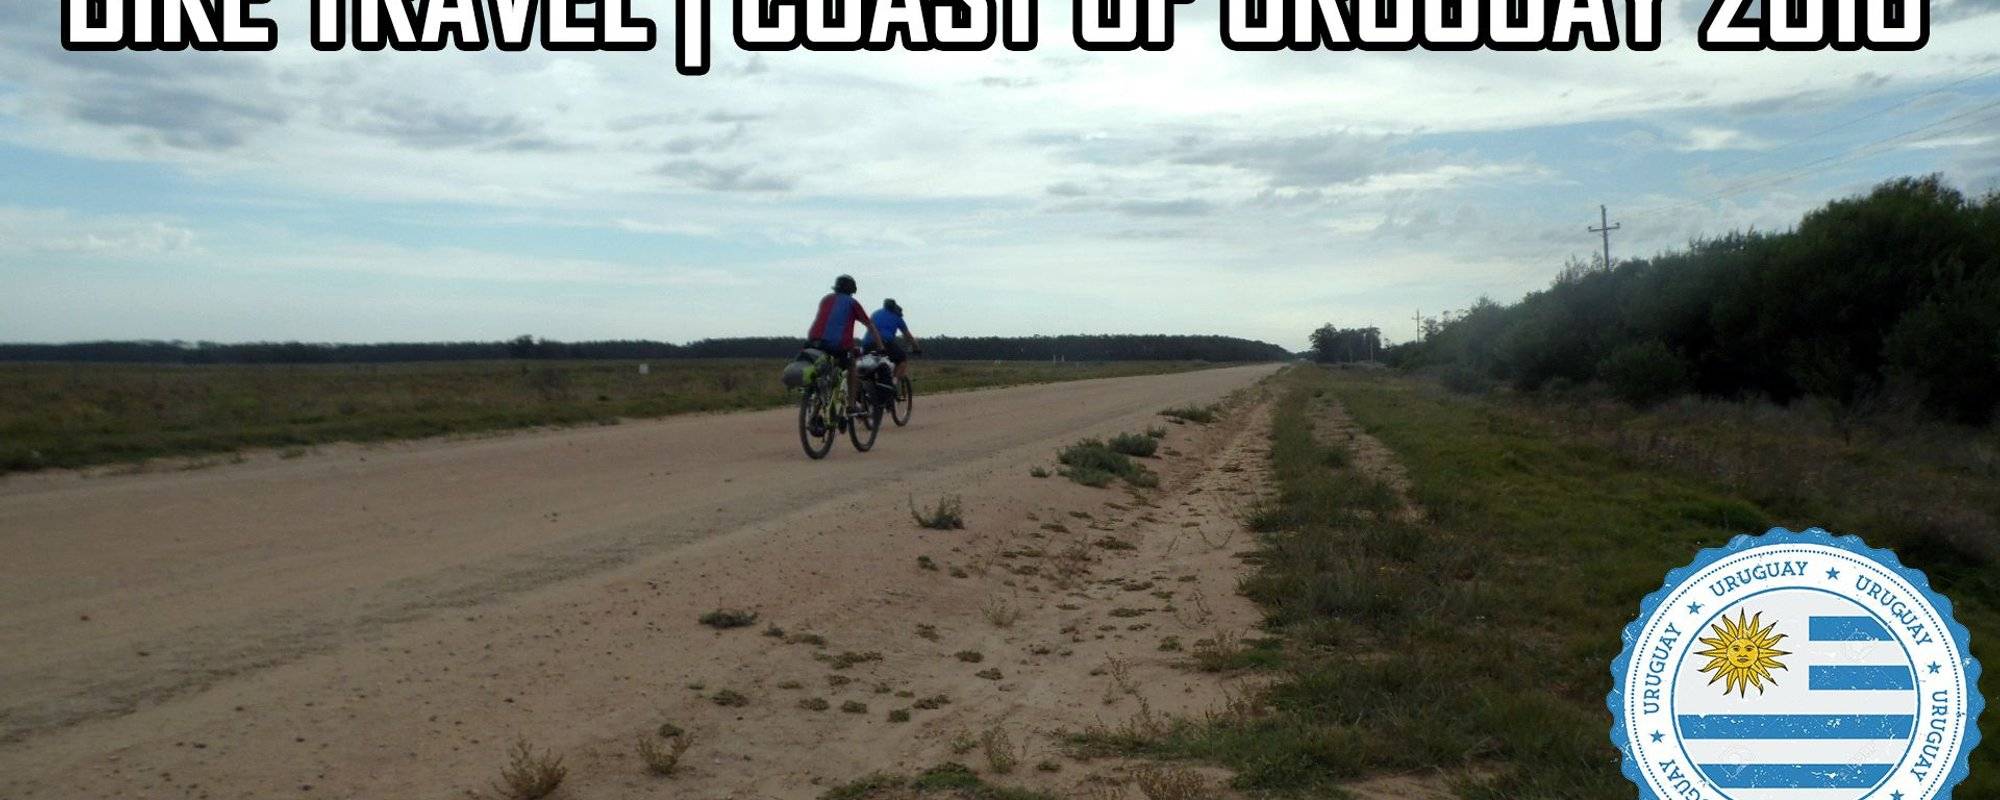 [PART 6] Travel Story: Coast of Uruguay by Bicycle | The Counter Wind